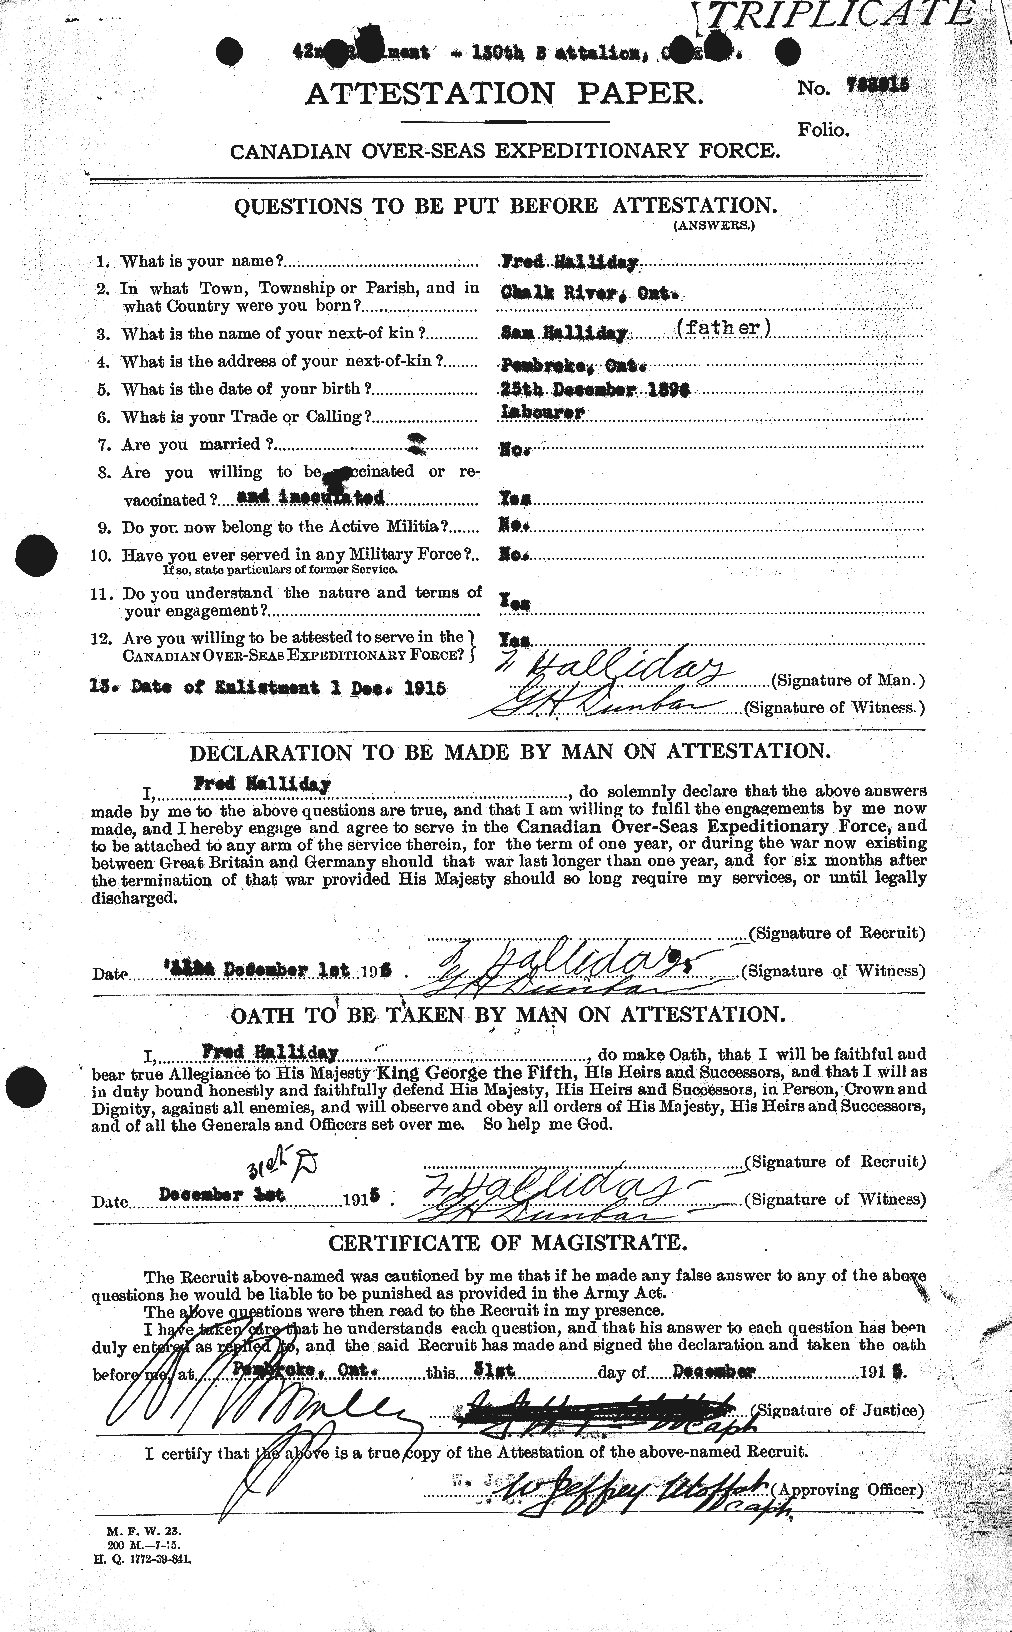 Personnel Records of the First World War - CEF 371965a